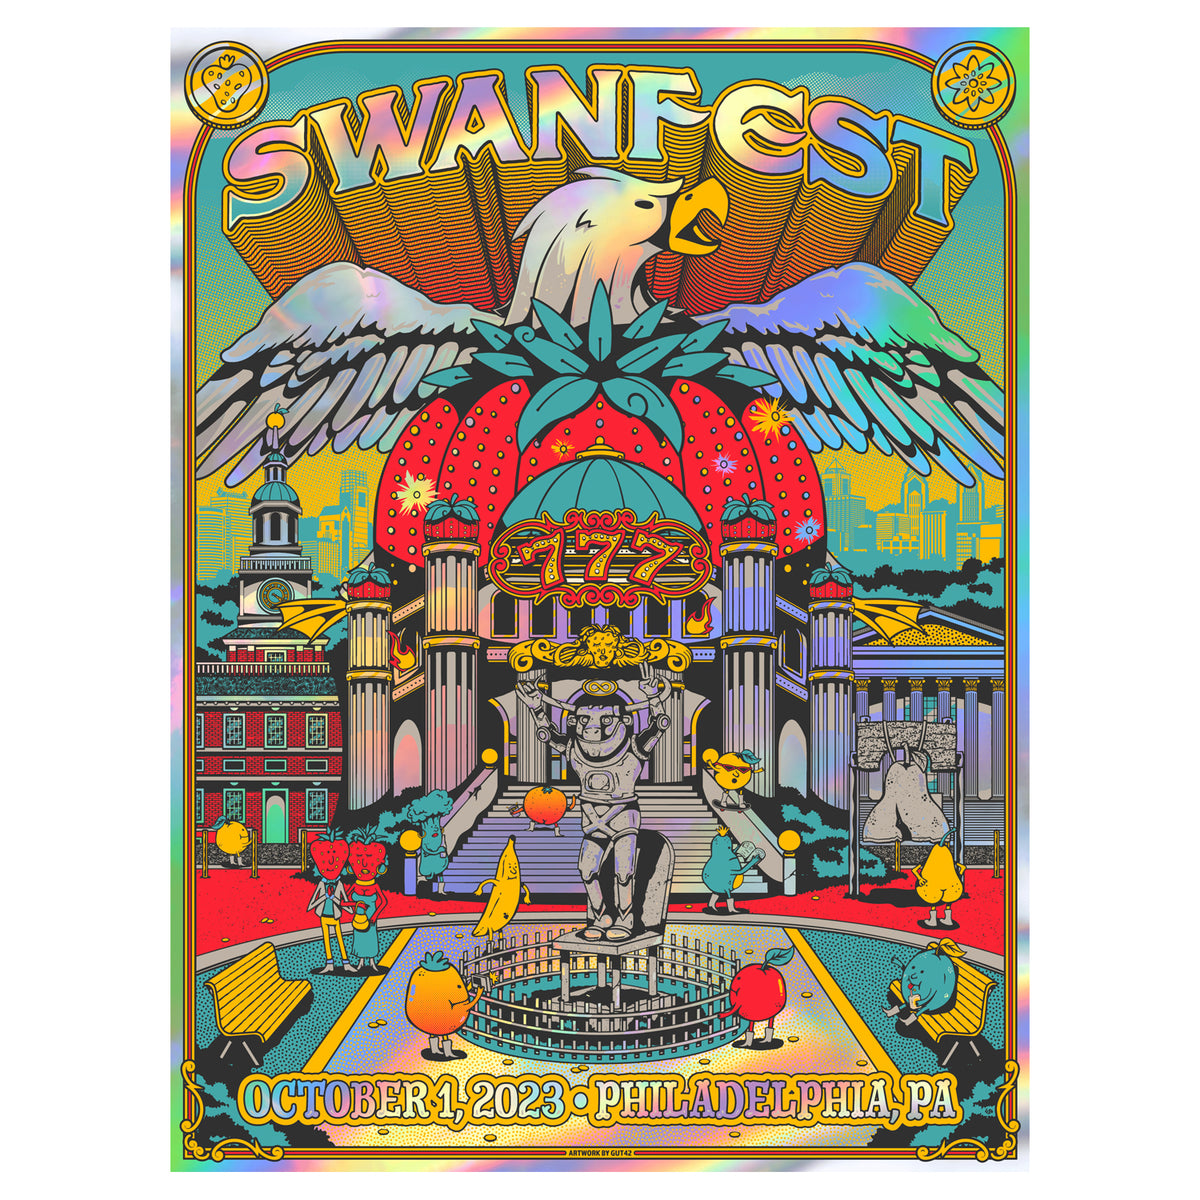 image of the poster for the swanfest 2023 on october 1, 2023 in philadelphia, PA